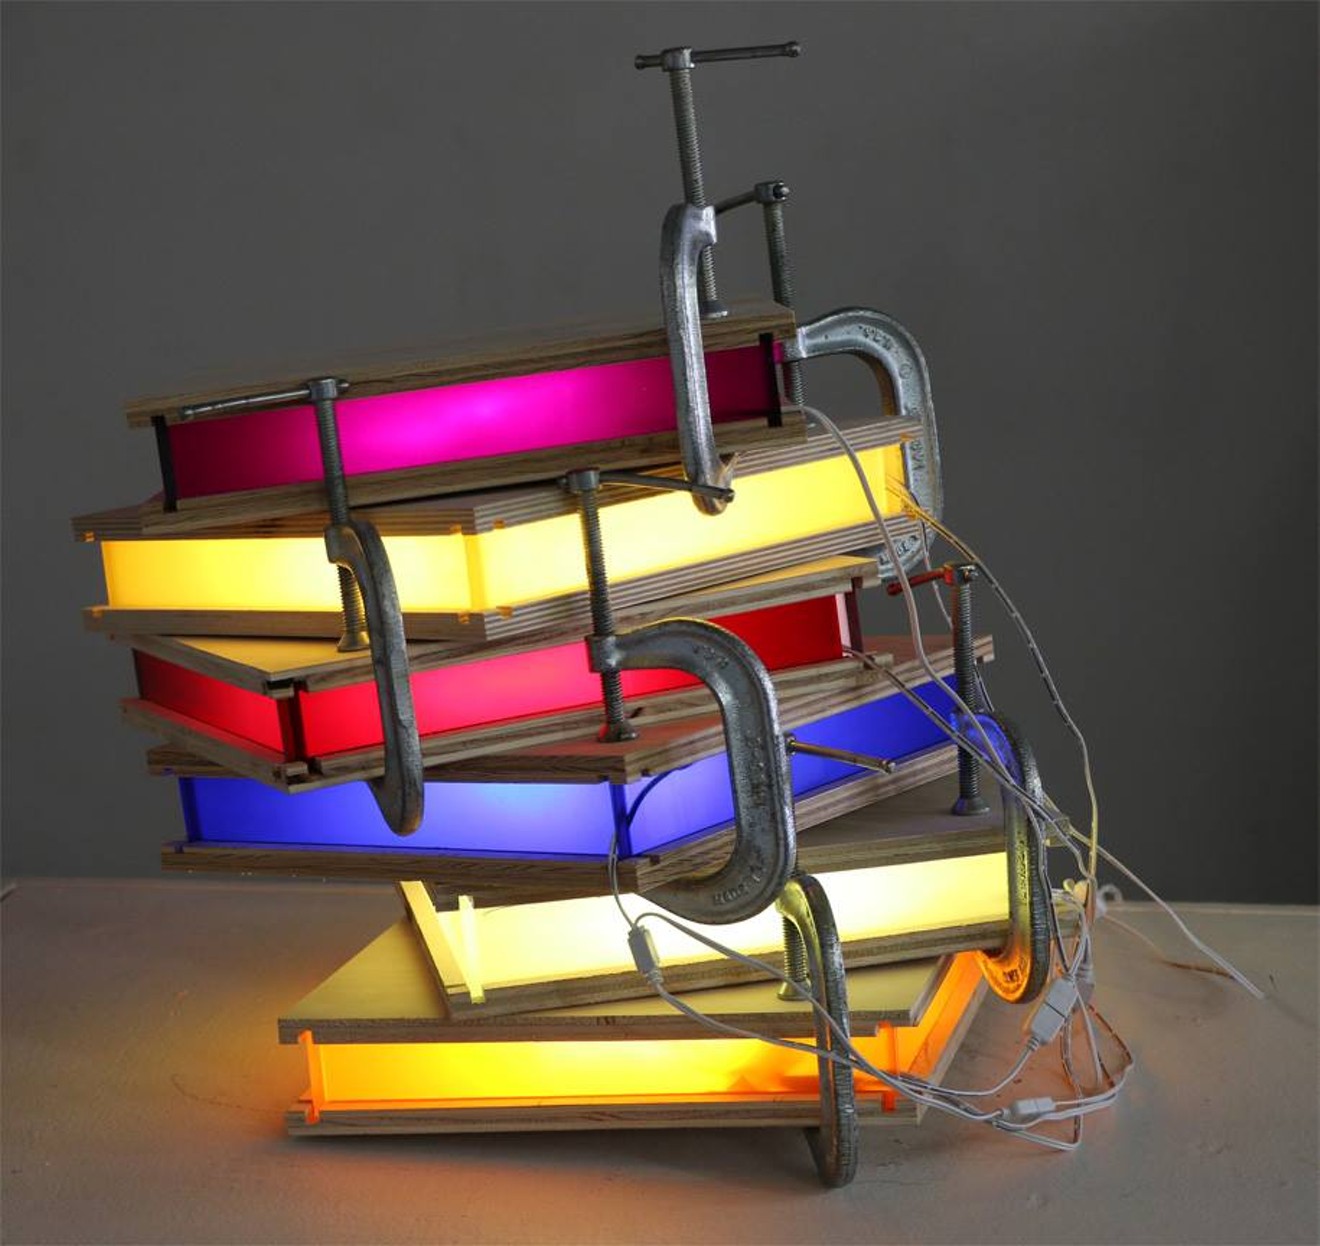 Craig Robb, "A Fractious Embrace," wood, acrylic, LED lights, C-clamps, 2017.